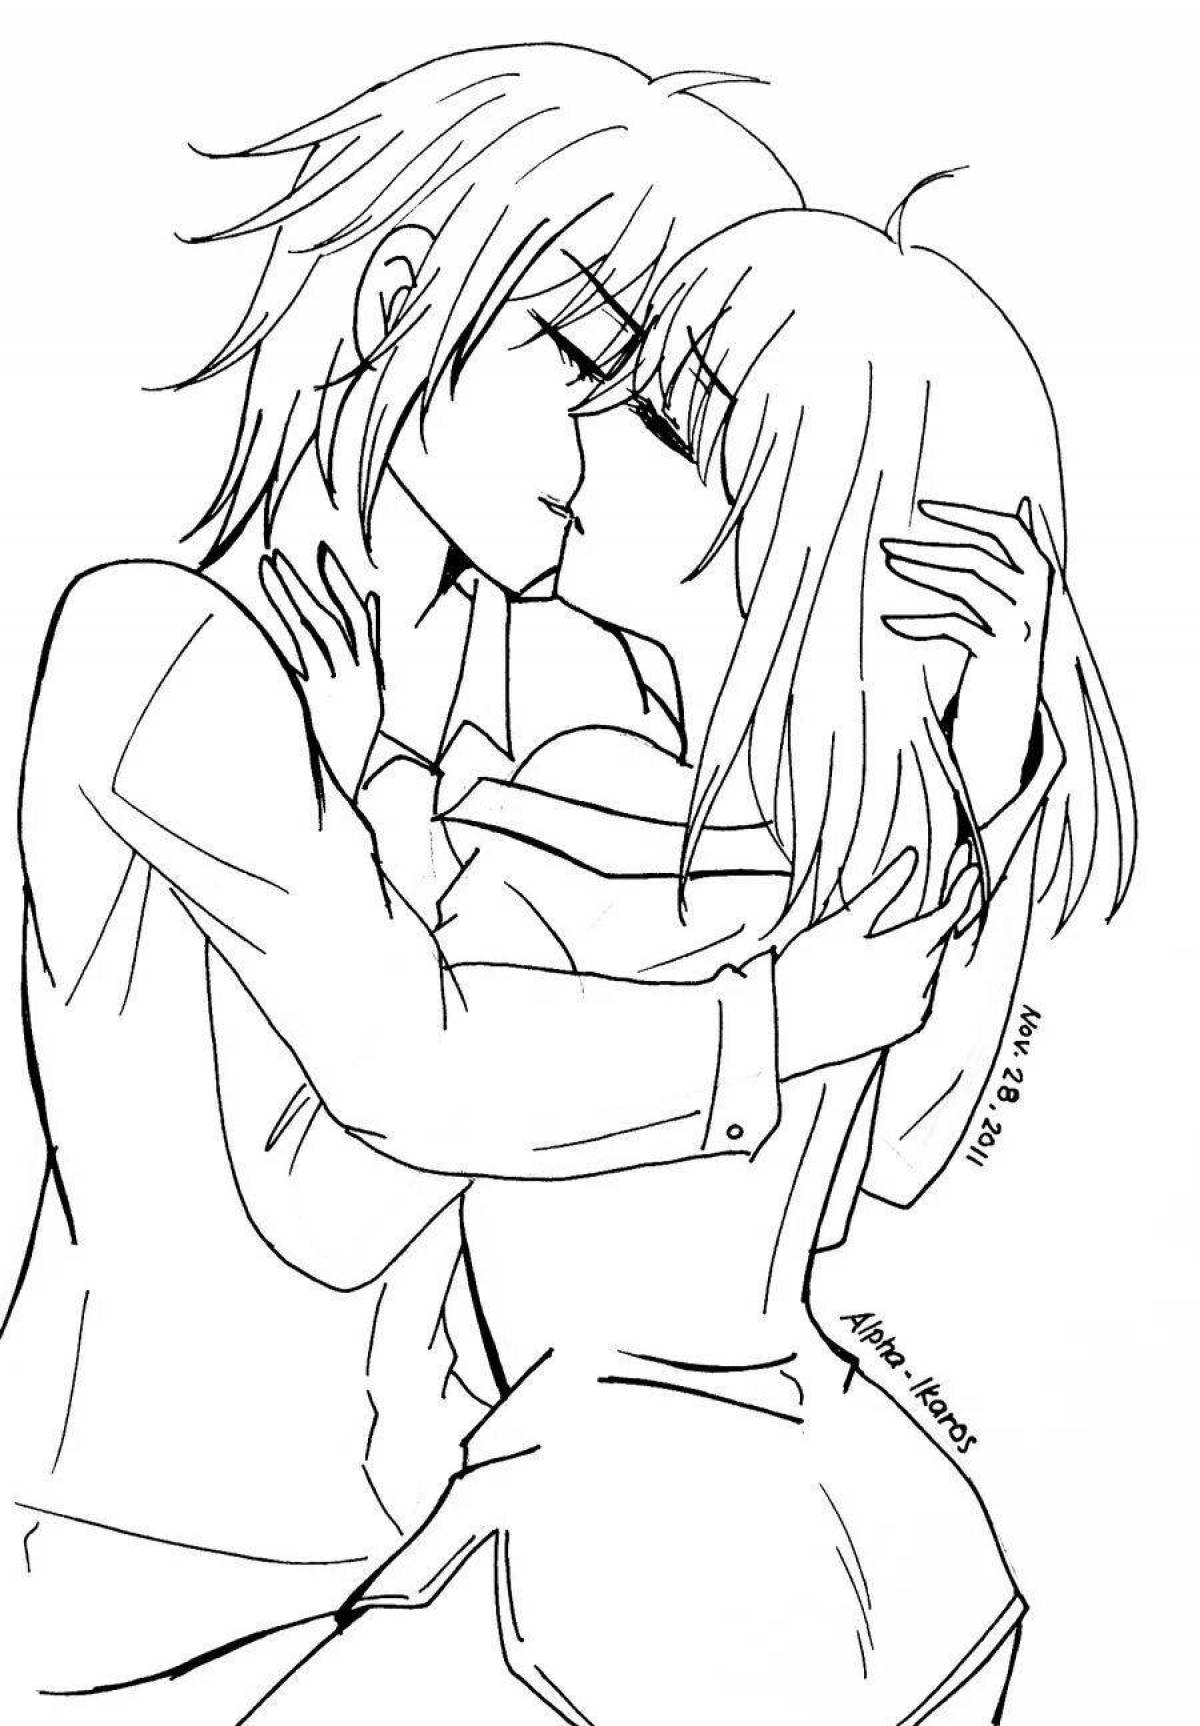 Awesome kiss anime coloring page